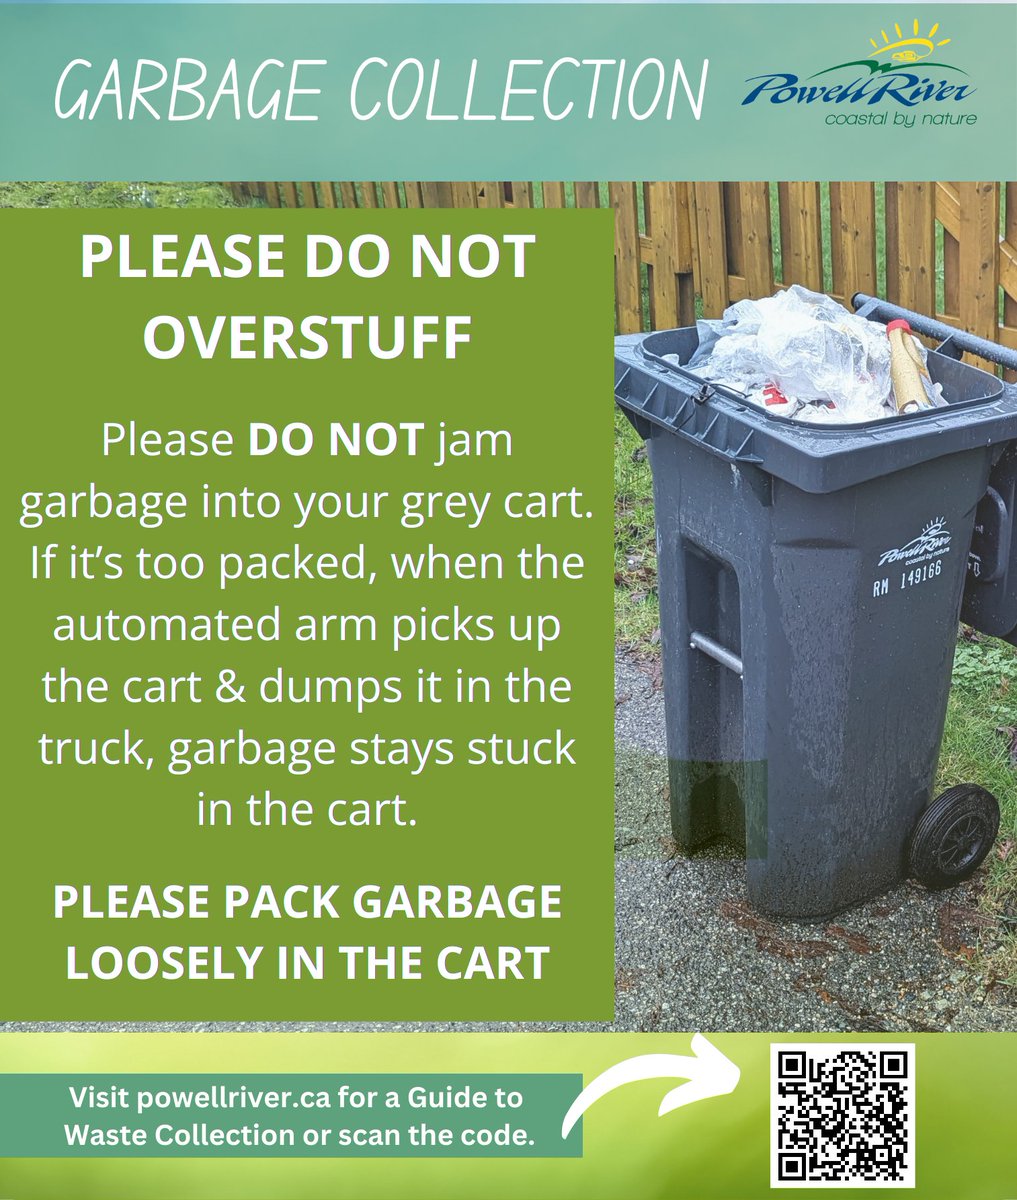 ℹ️ If you have too much garbage and overstuff, keep it loose by putting out an extra bag on collection day for a $5 tag or you have the option of purchasing a second cart for $80.